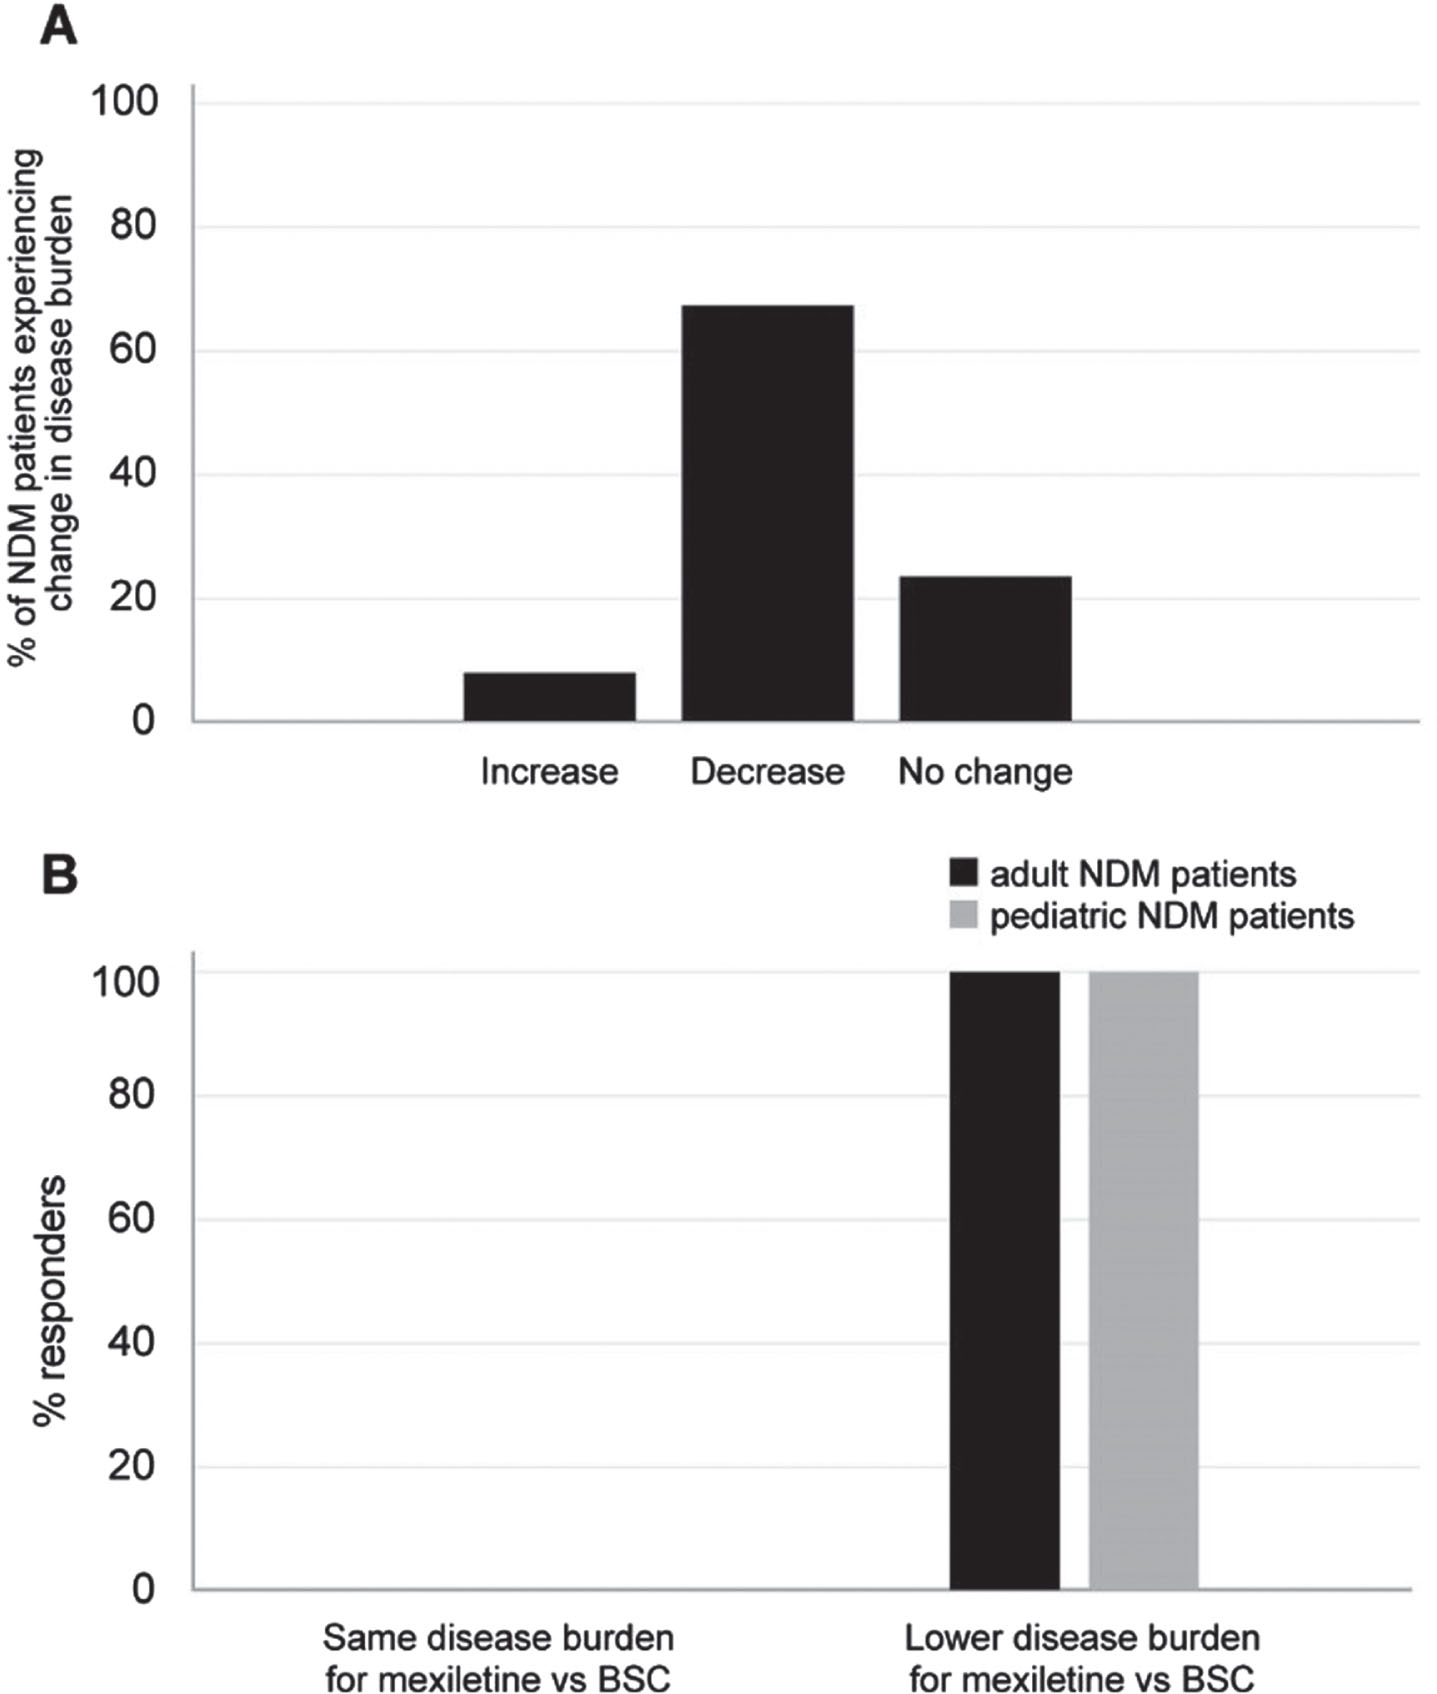 (A) Percentage of NDM patients expected to experience a change in myotonia-related disease burden upon use of mexiletine vs BSC in the opinion of the expert panelists. (B) Percentage of panelists foreseeing a change in the disease burden for NDM adult (black bar) and pediatric (gray bar) patients upon use of mexiletine vs BSC. BSC: best supportive care.